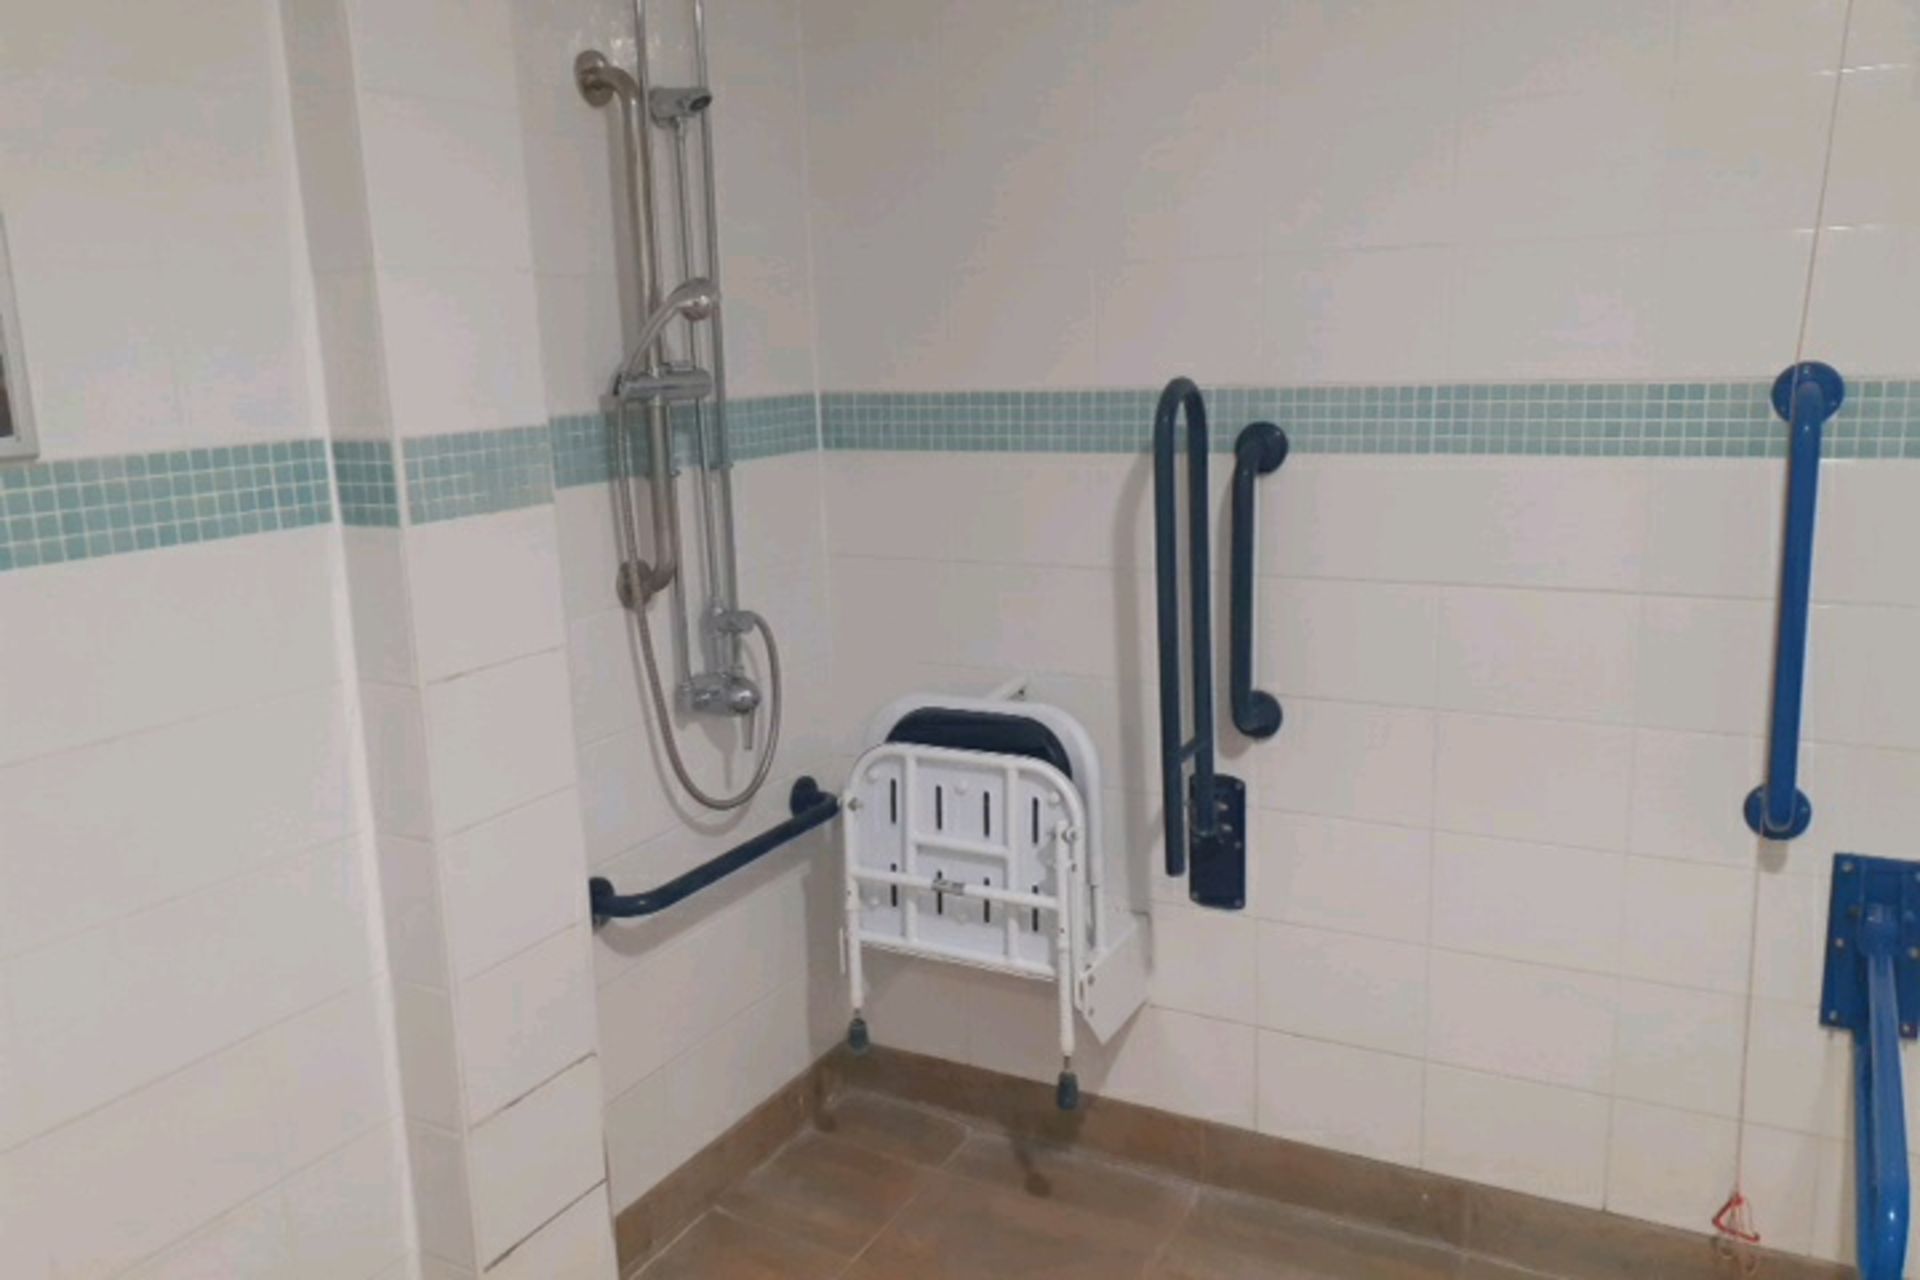 Accessible toilet - Image 2 of 4